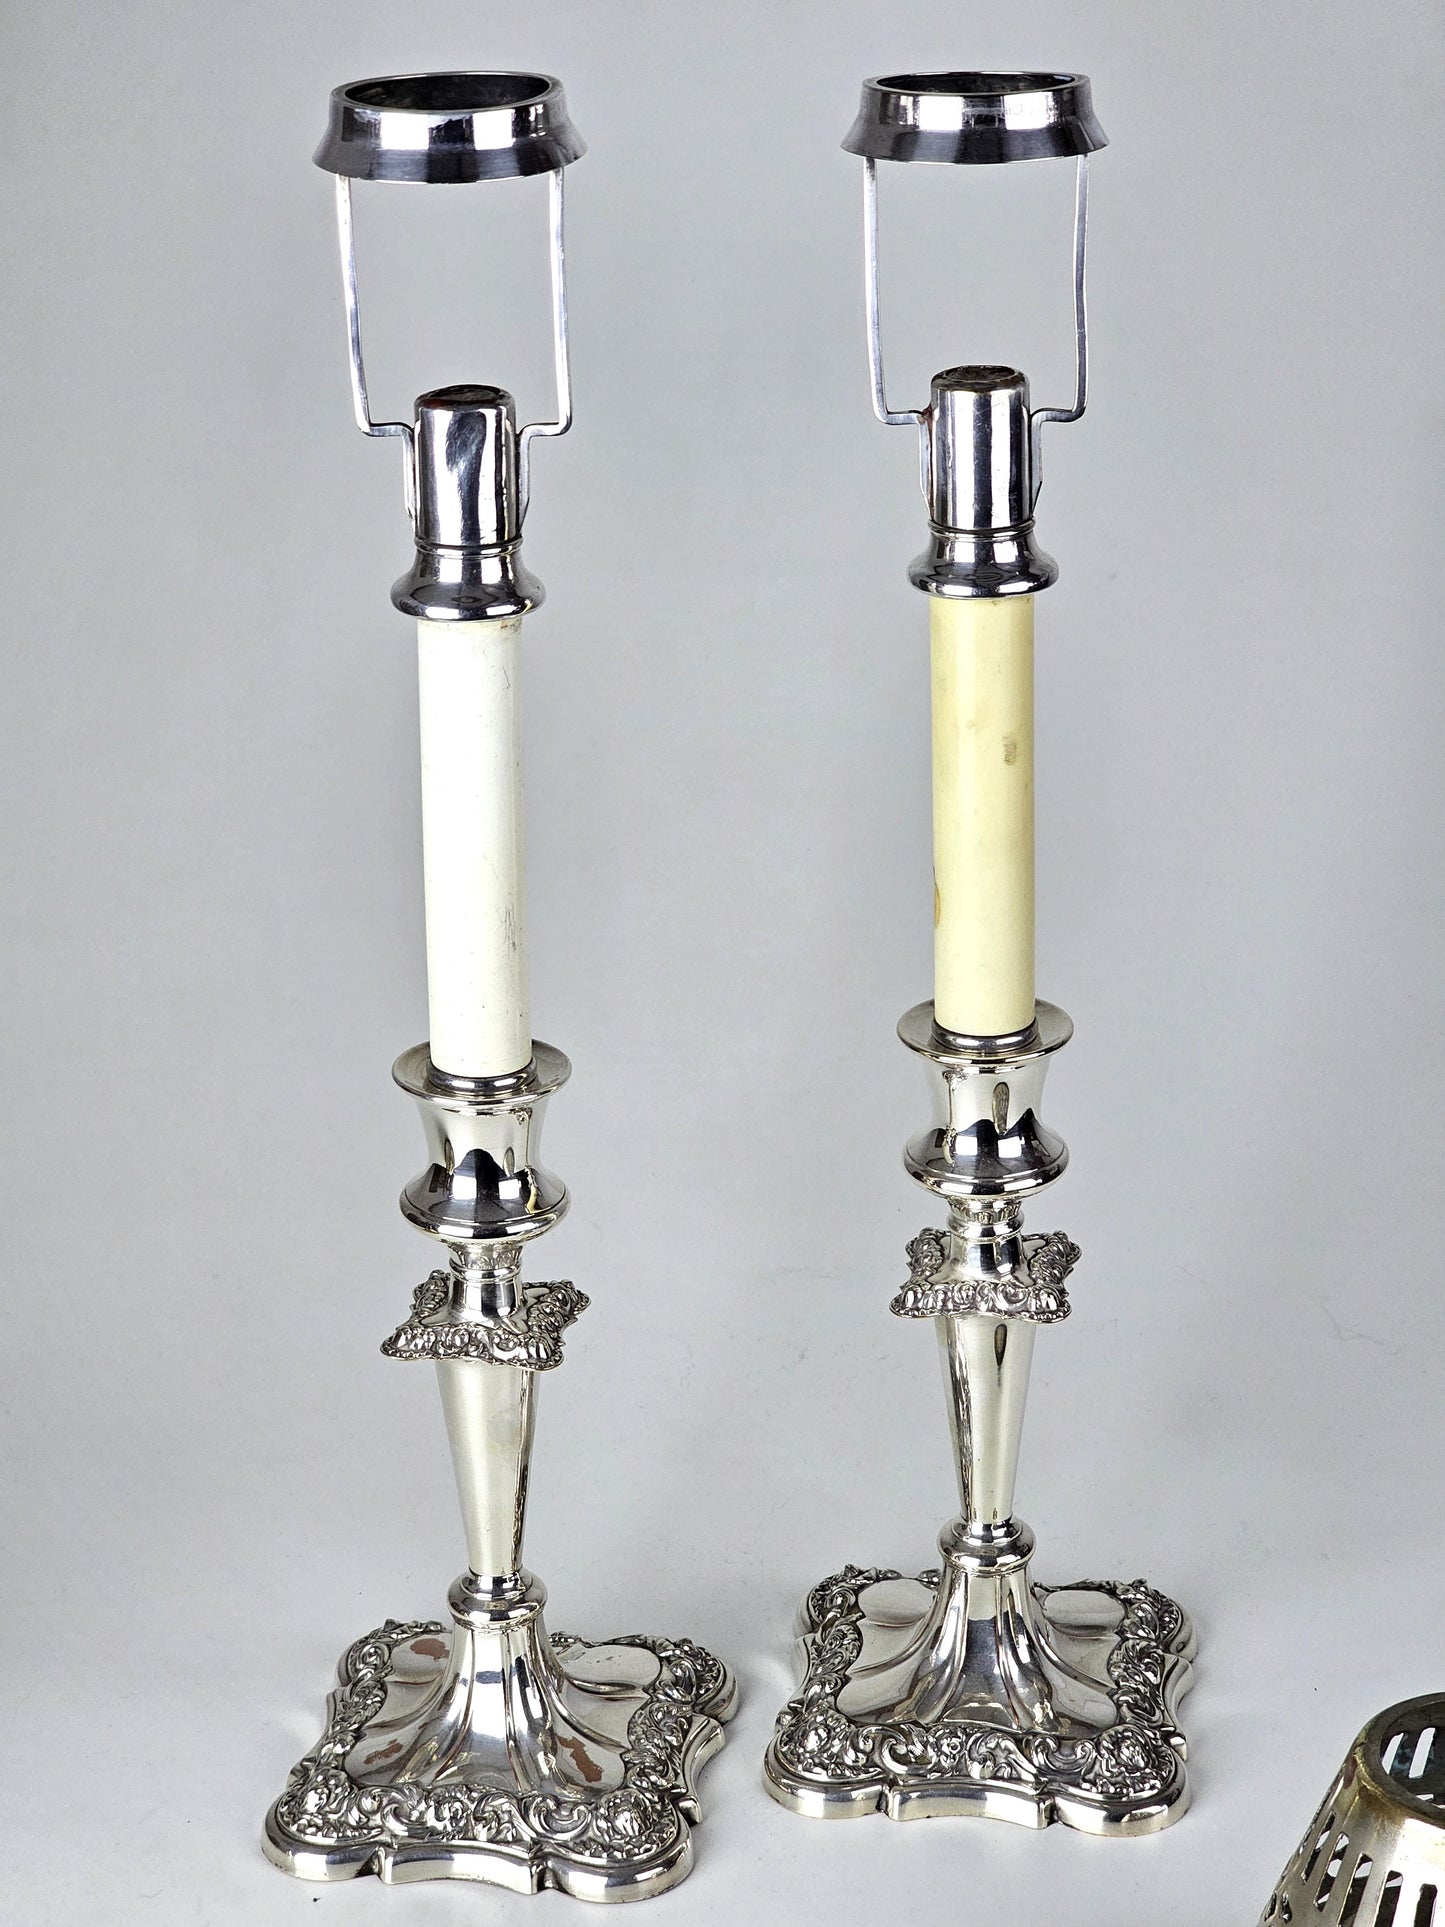 Candlesticks - Spring Loaded Candle Holders